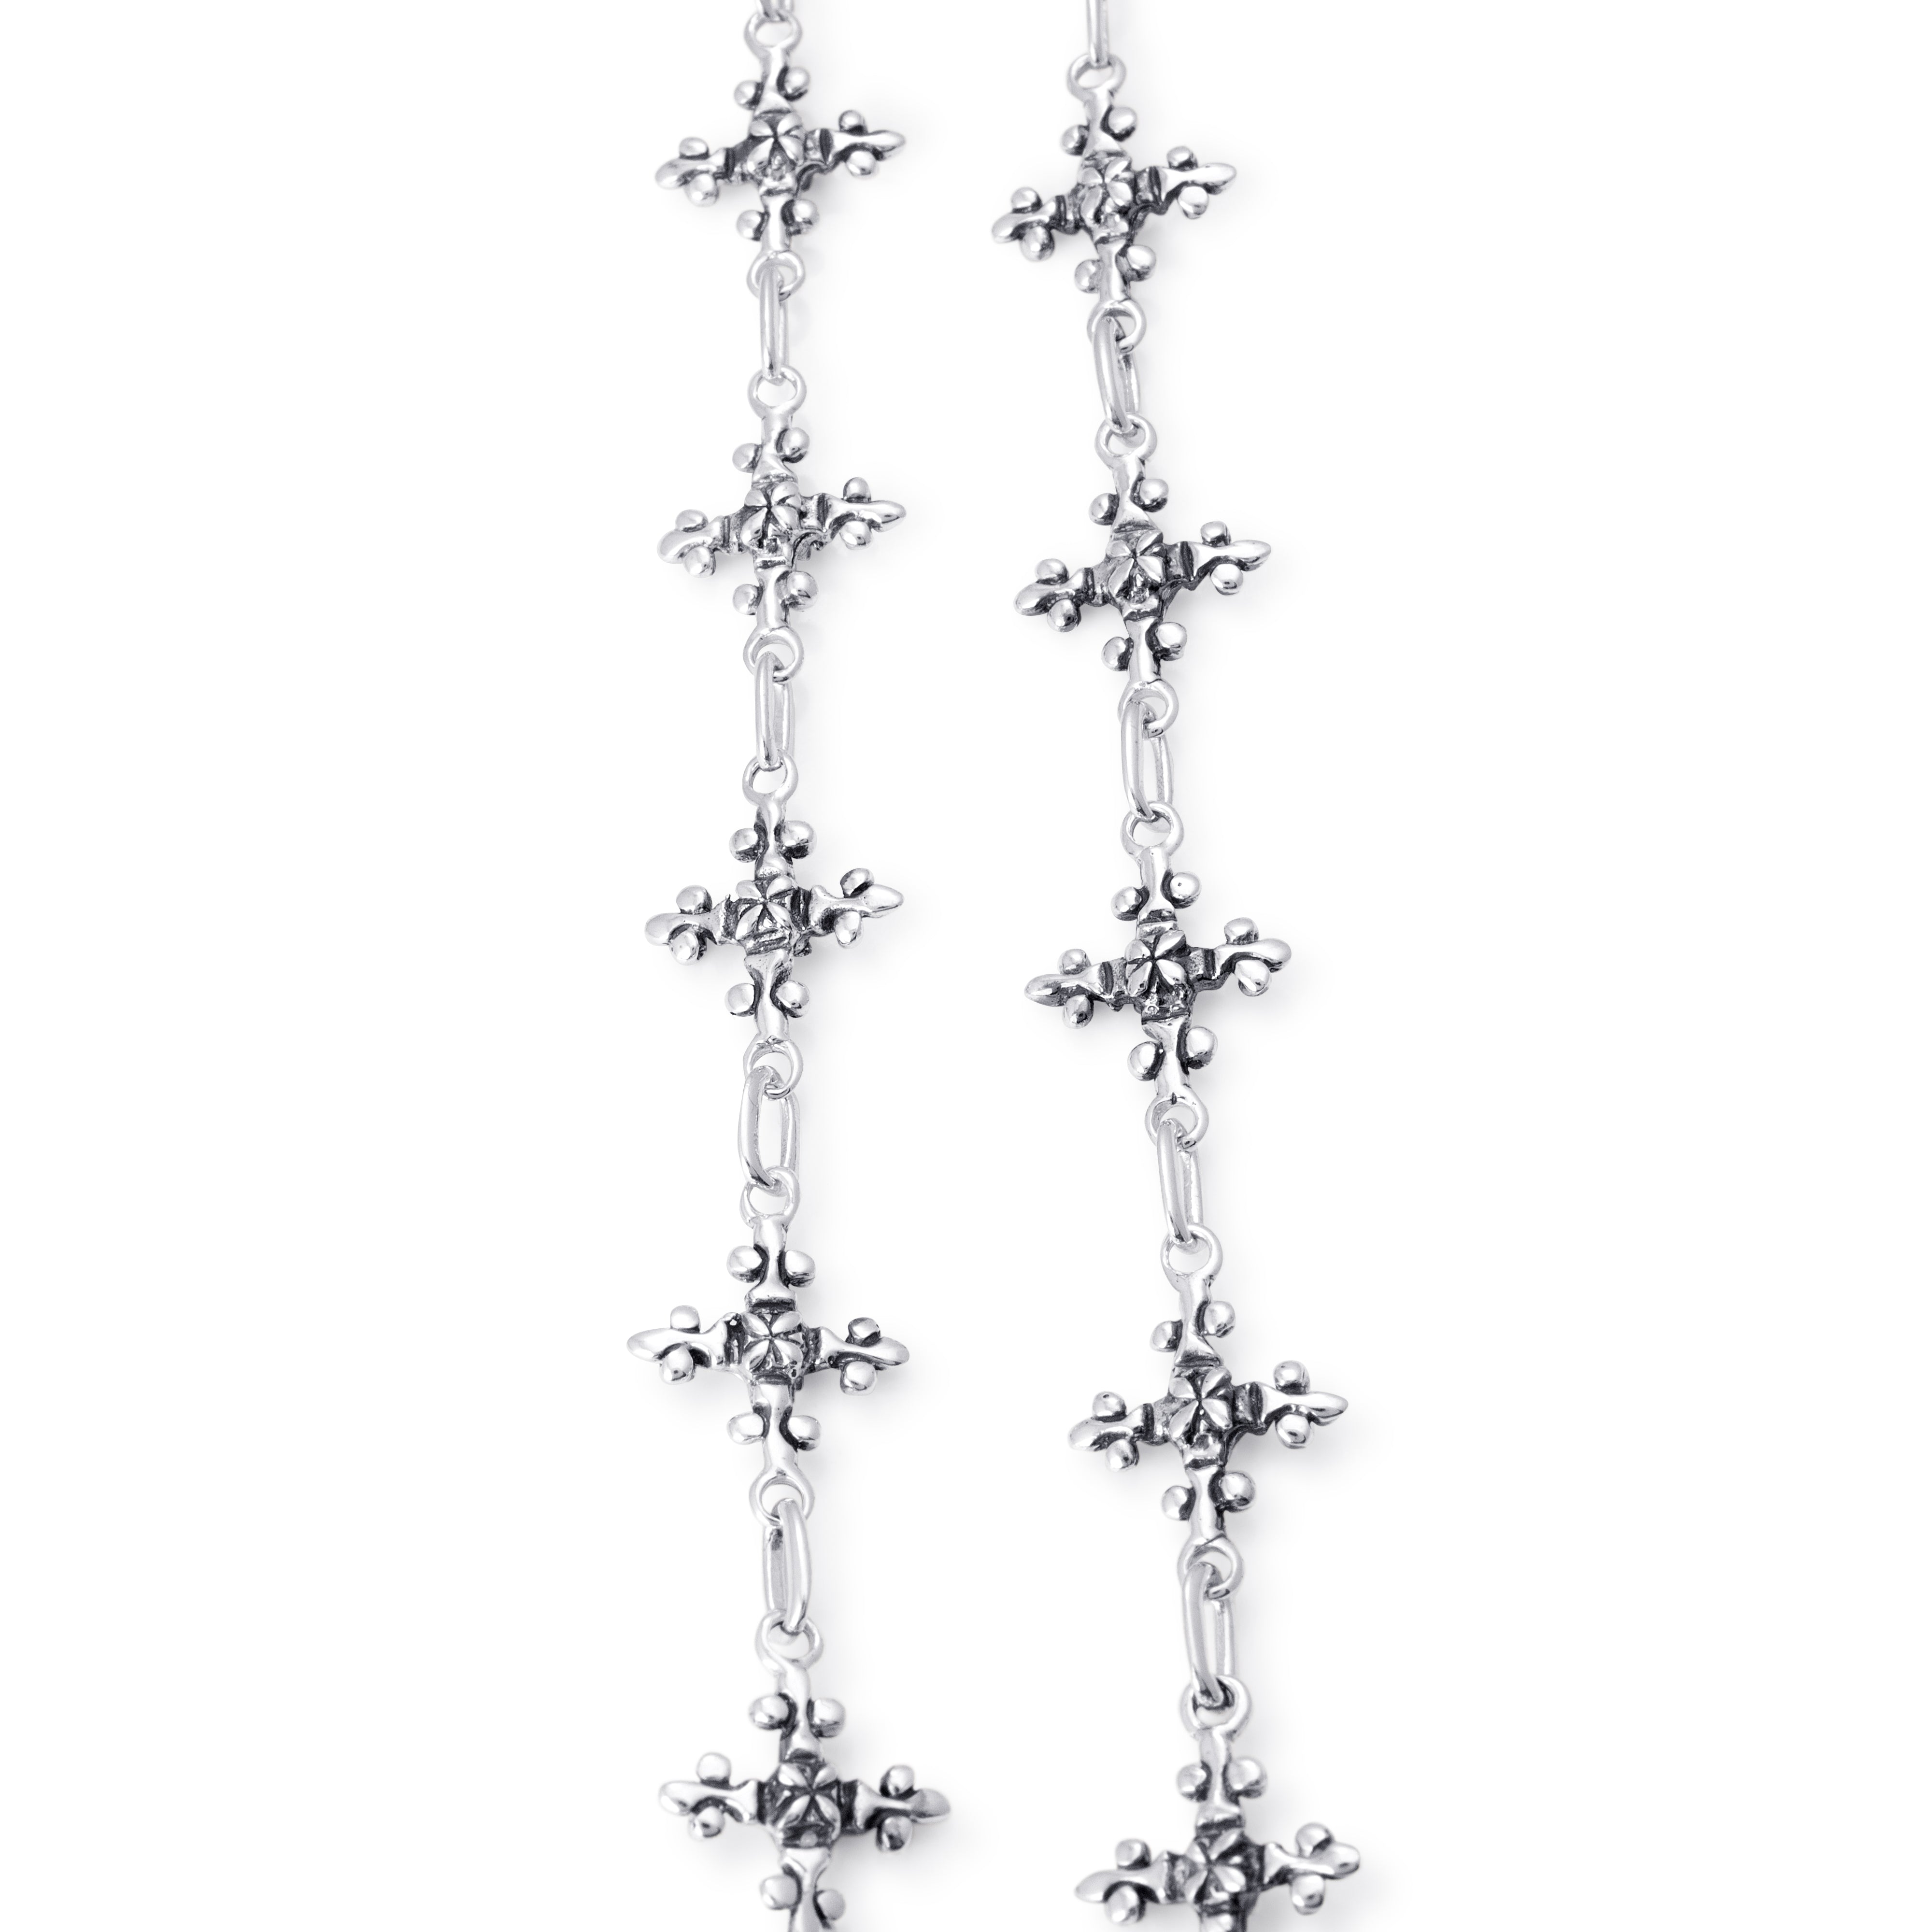 Bloodline Design W-Necklaces The Antique French Cross Necklace